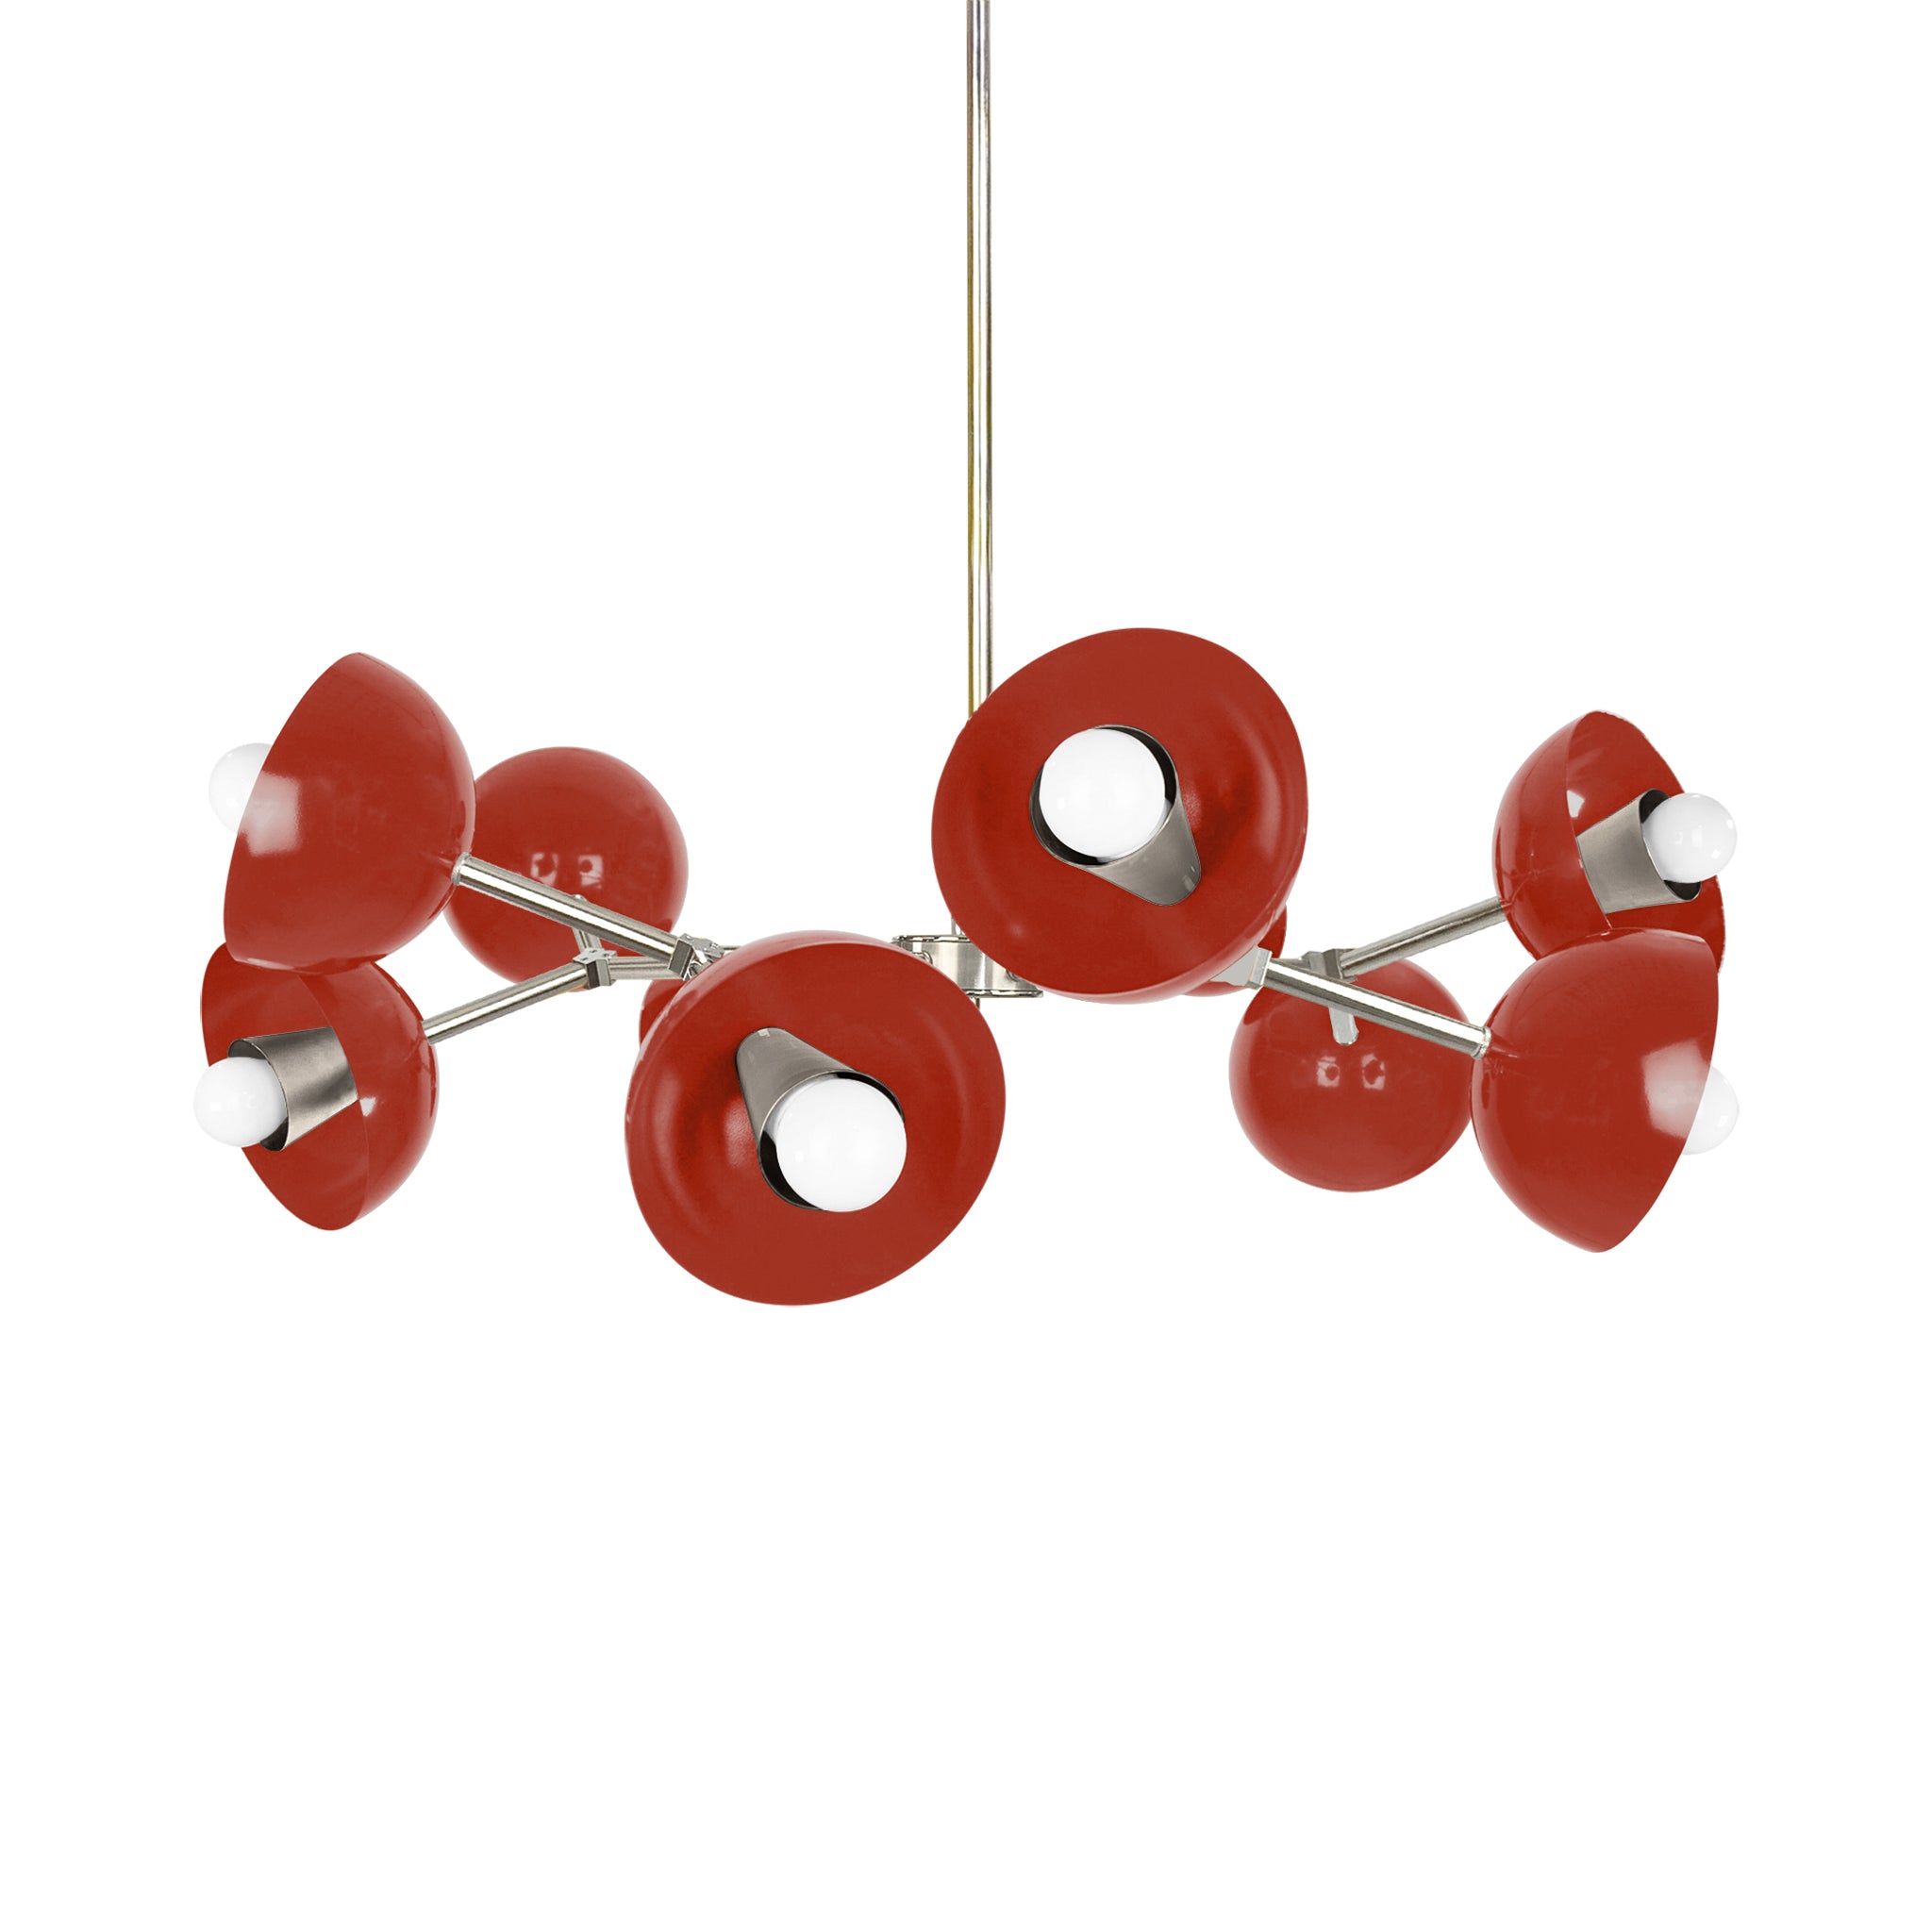 Nickel and riding hood red color Alegria chandelier 30" Dutton Brown lighting